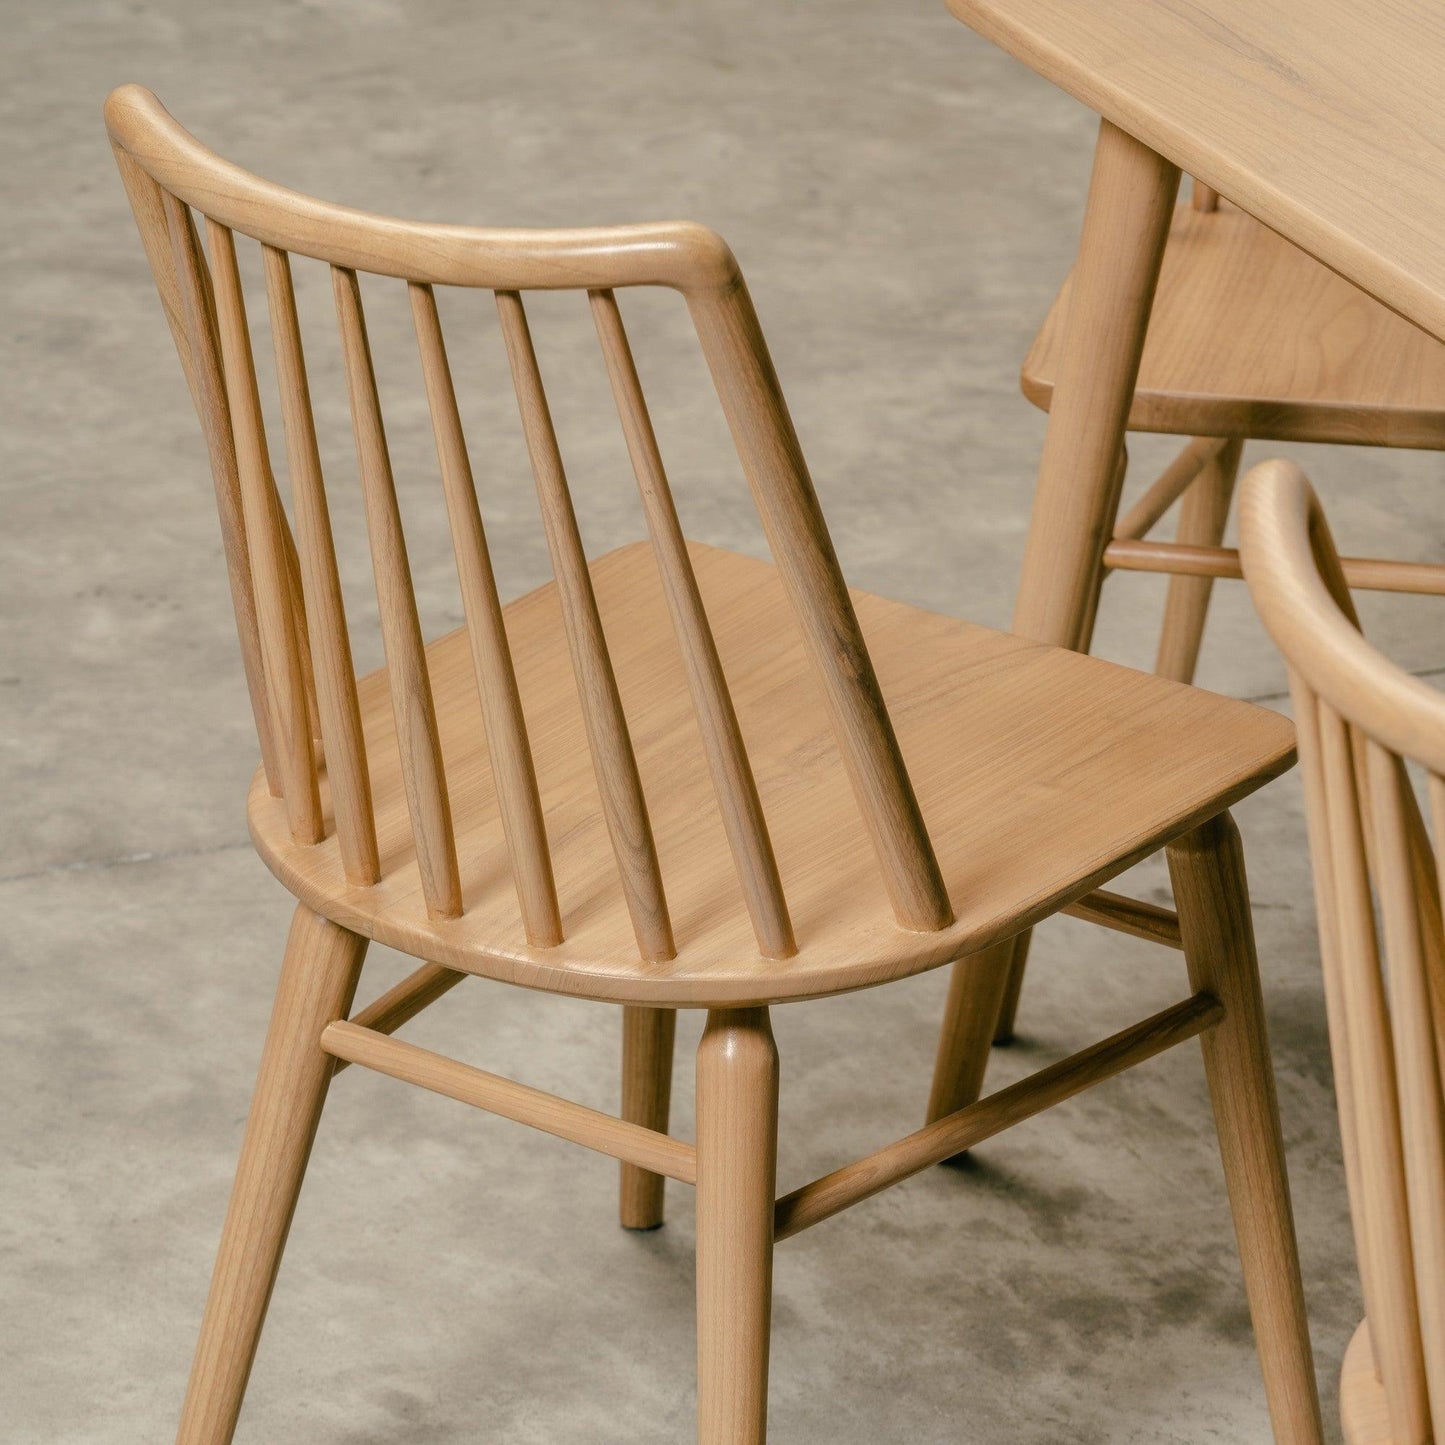 Riviera Solid Oak Dining Chair - Set fo 2 (Natural) - Dining ChairCH 050 RVR Set of 2 (N)754169483524 4